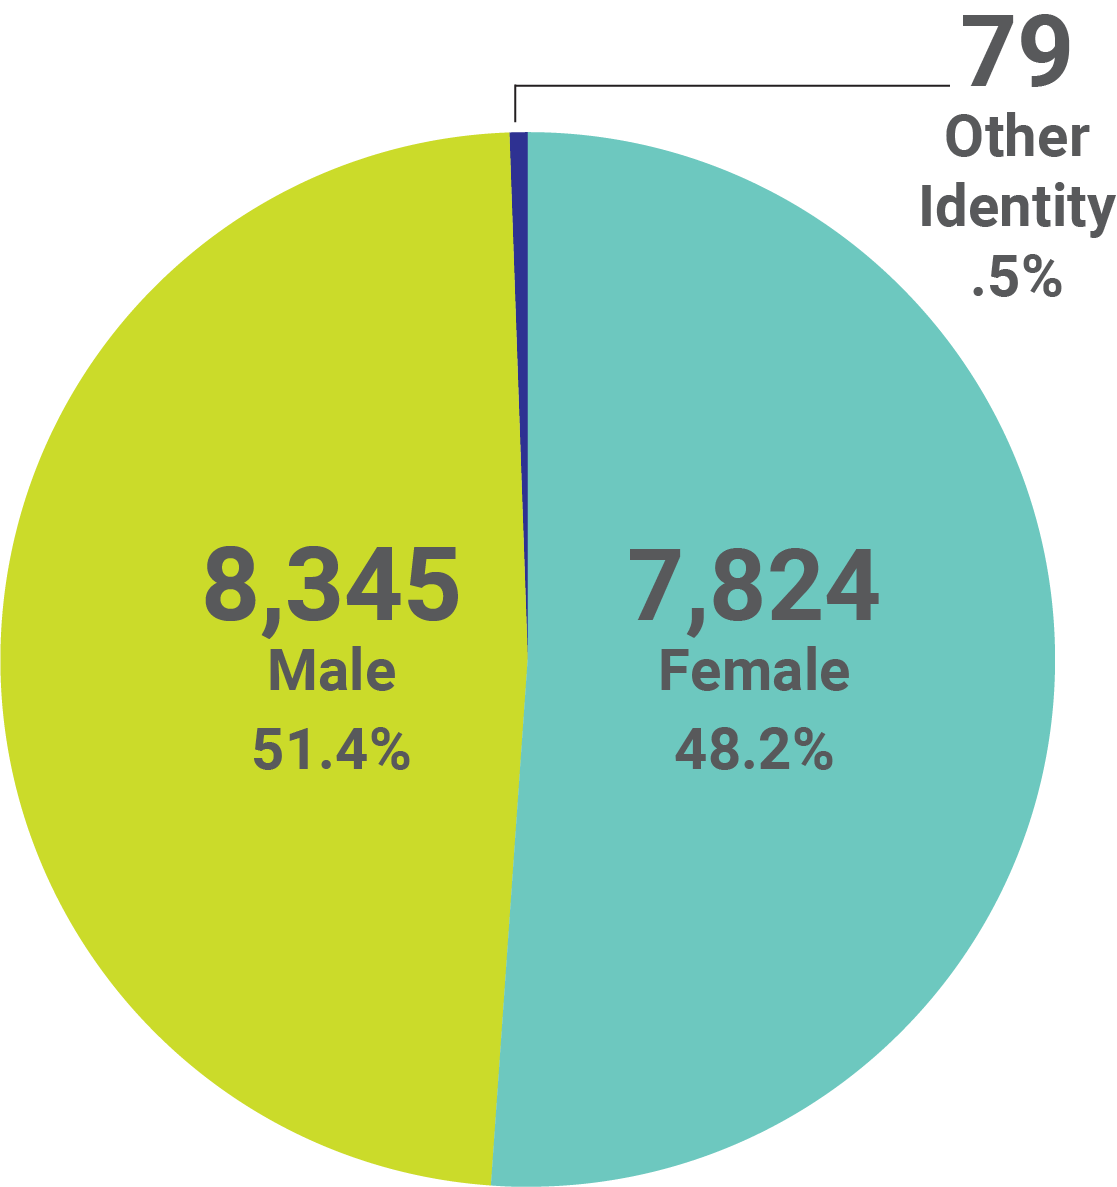 Graphic showing the demographics of students by gender identity. Male with 8,345 at 51.4%, Female with 7,824 at 48.2%, and Other Identity with 79 at 0.5%. 